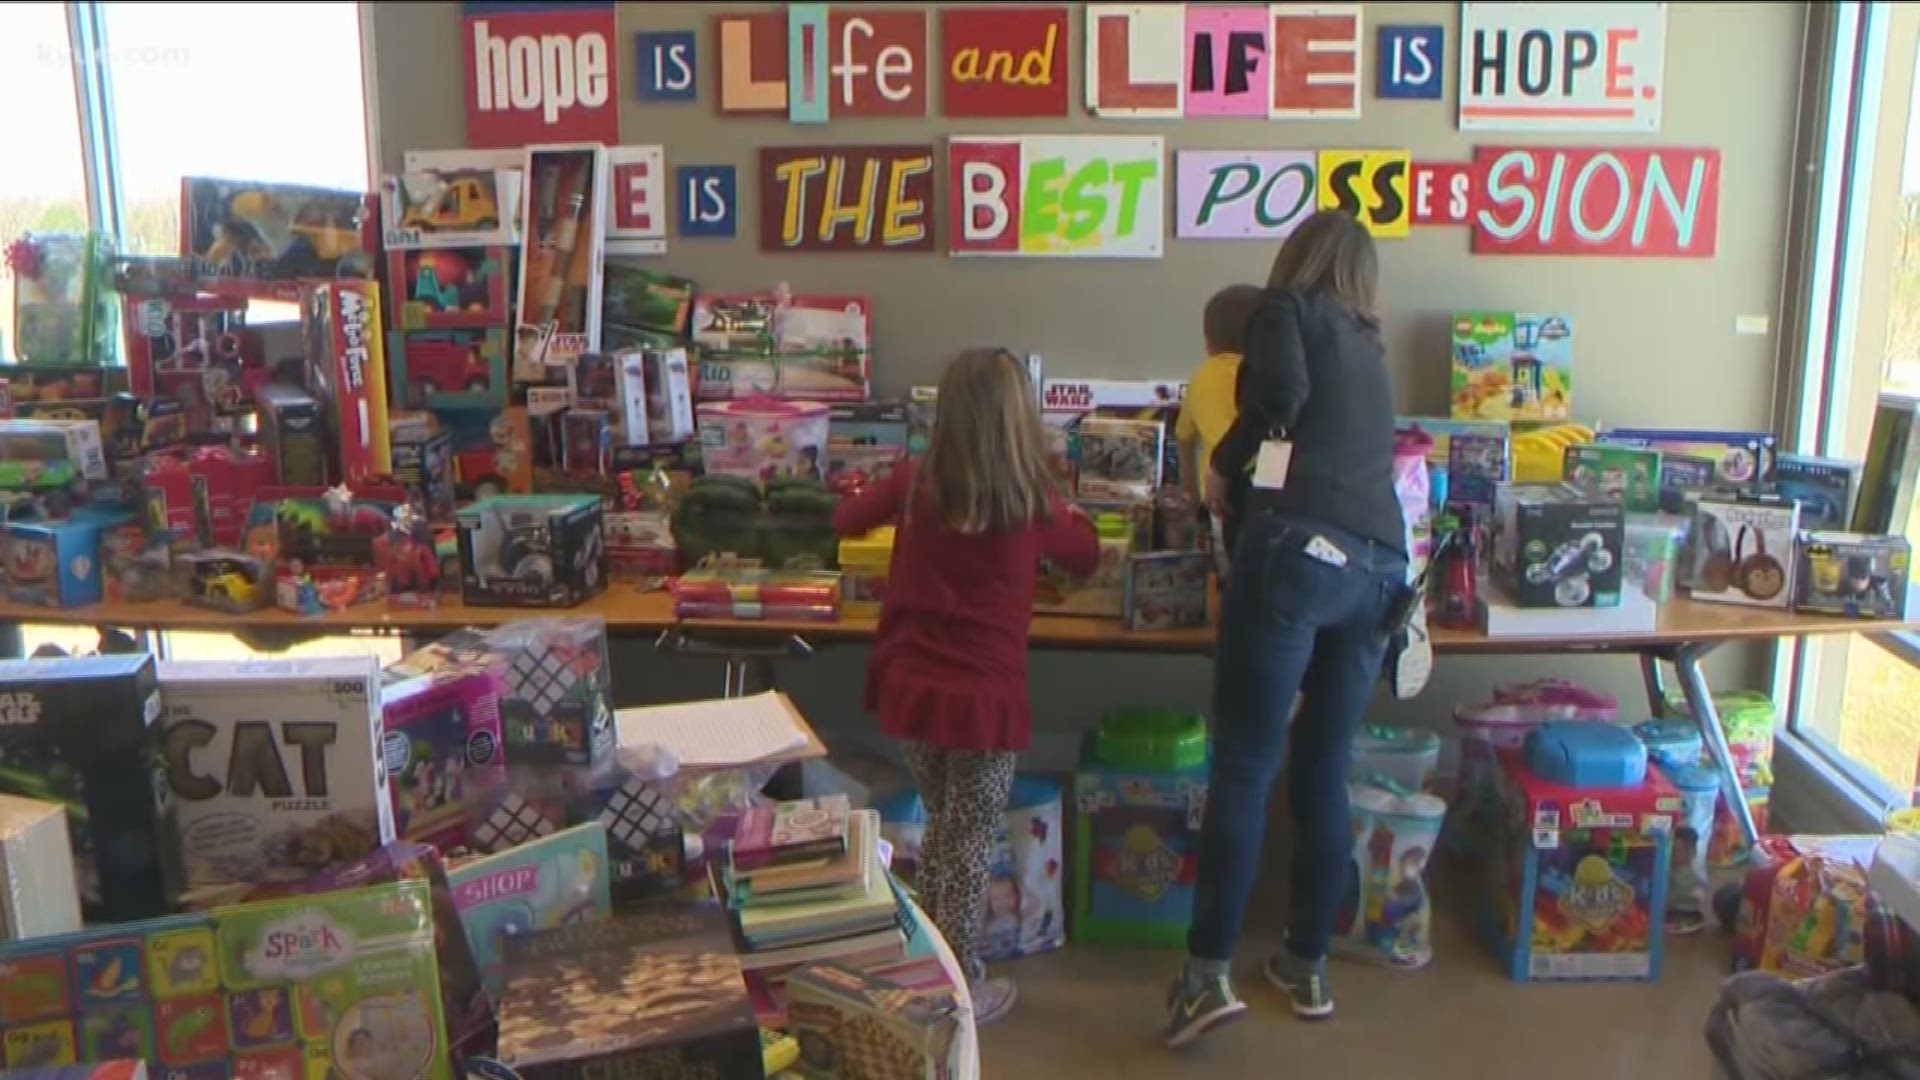 Santa's workshop at the Ronald McDonald House is stepping in to give children in the hospital a sense of normalcy.